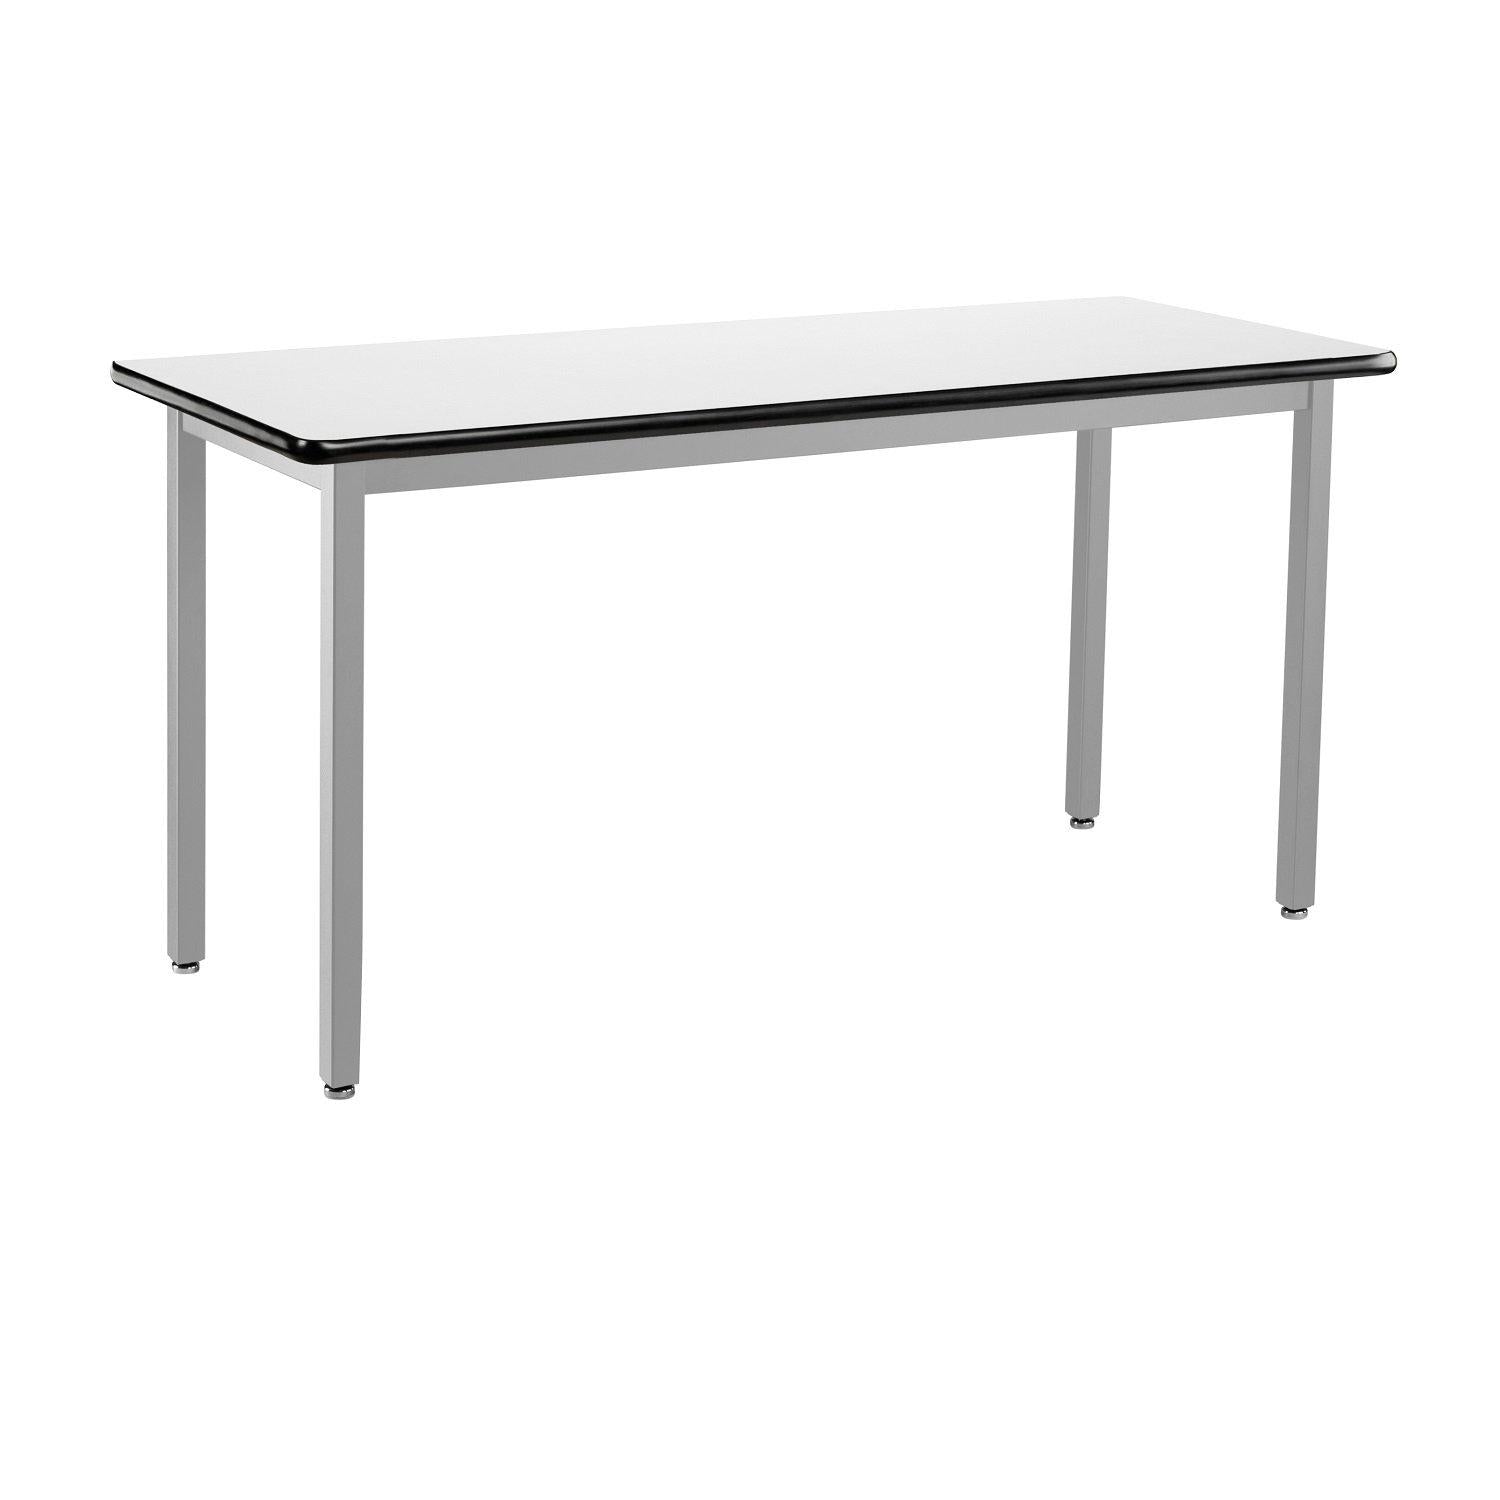 Heavy-Duty Fixed Height Utility Table, Soft Grey Frame, 24" x 54", Whiteboard High-Pressure Laminate Top